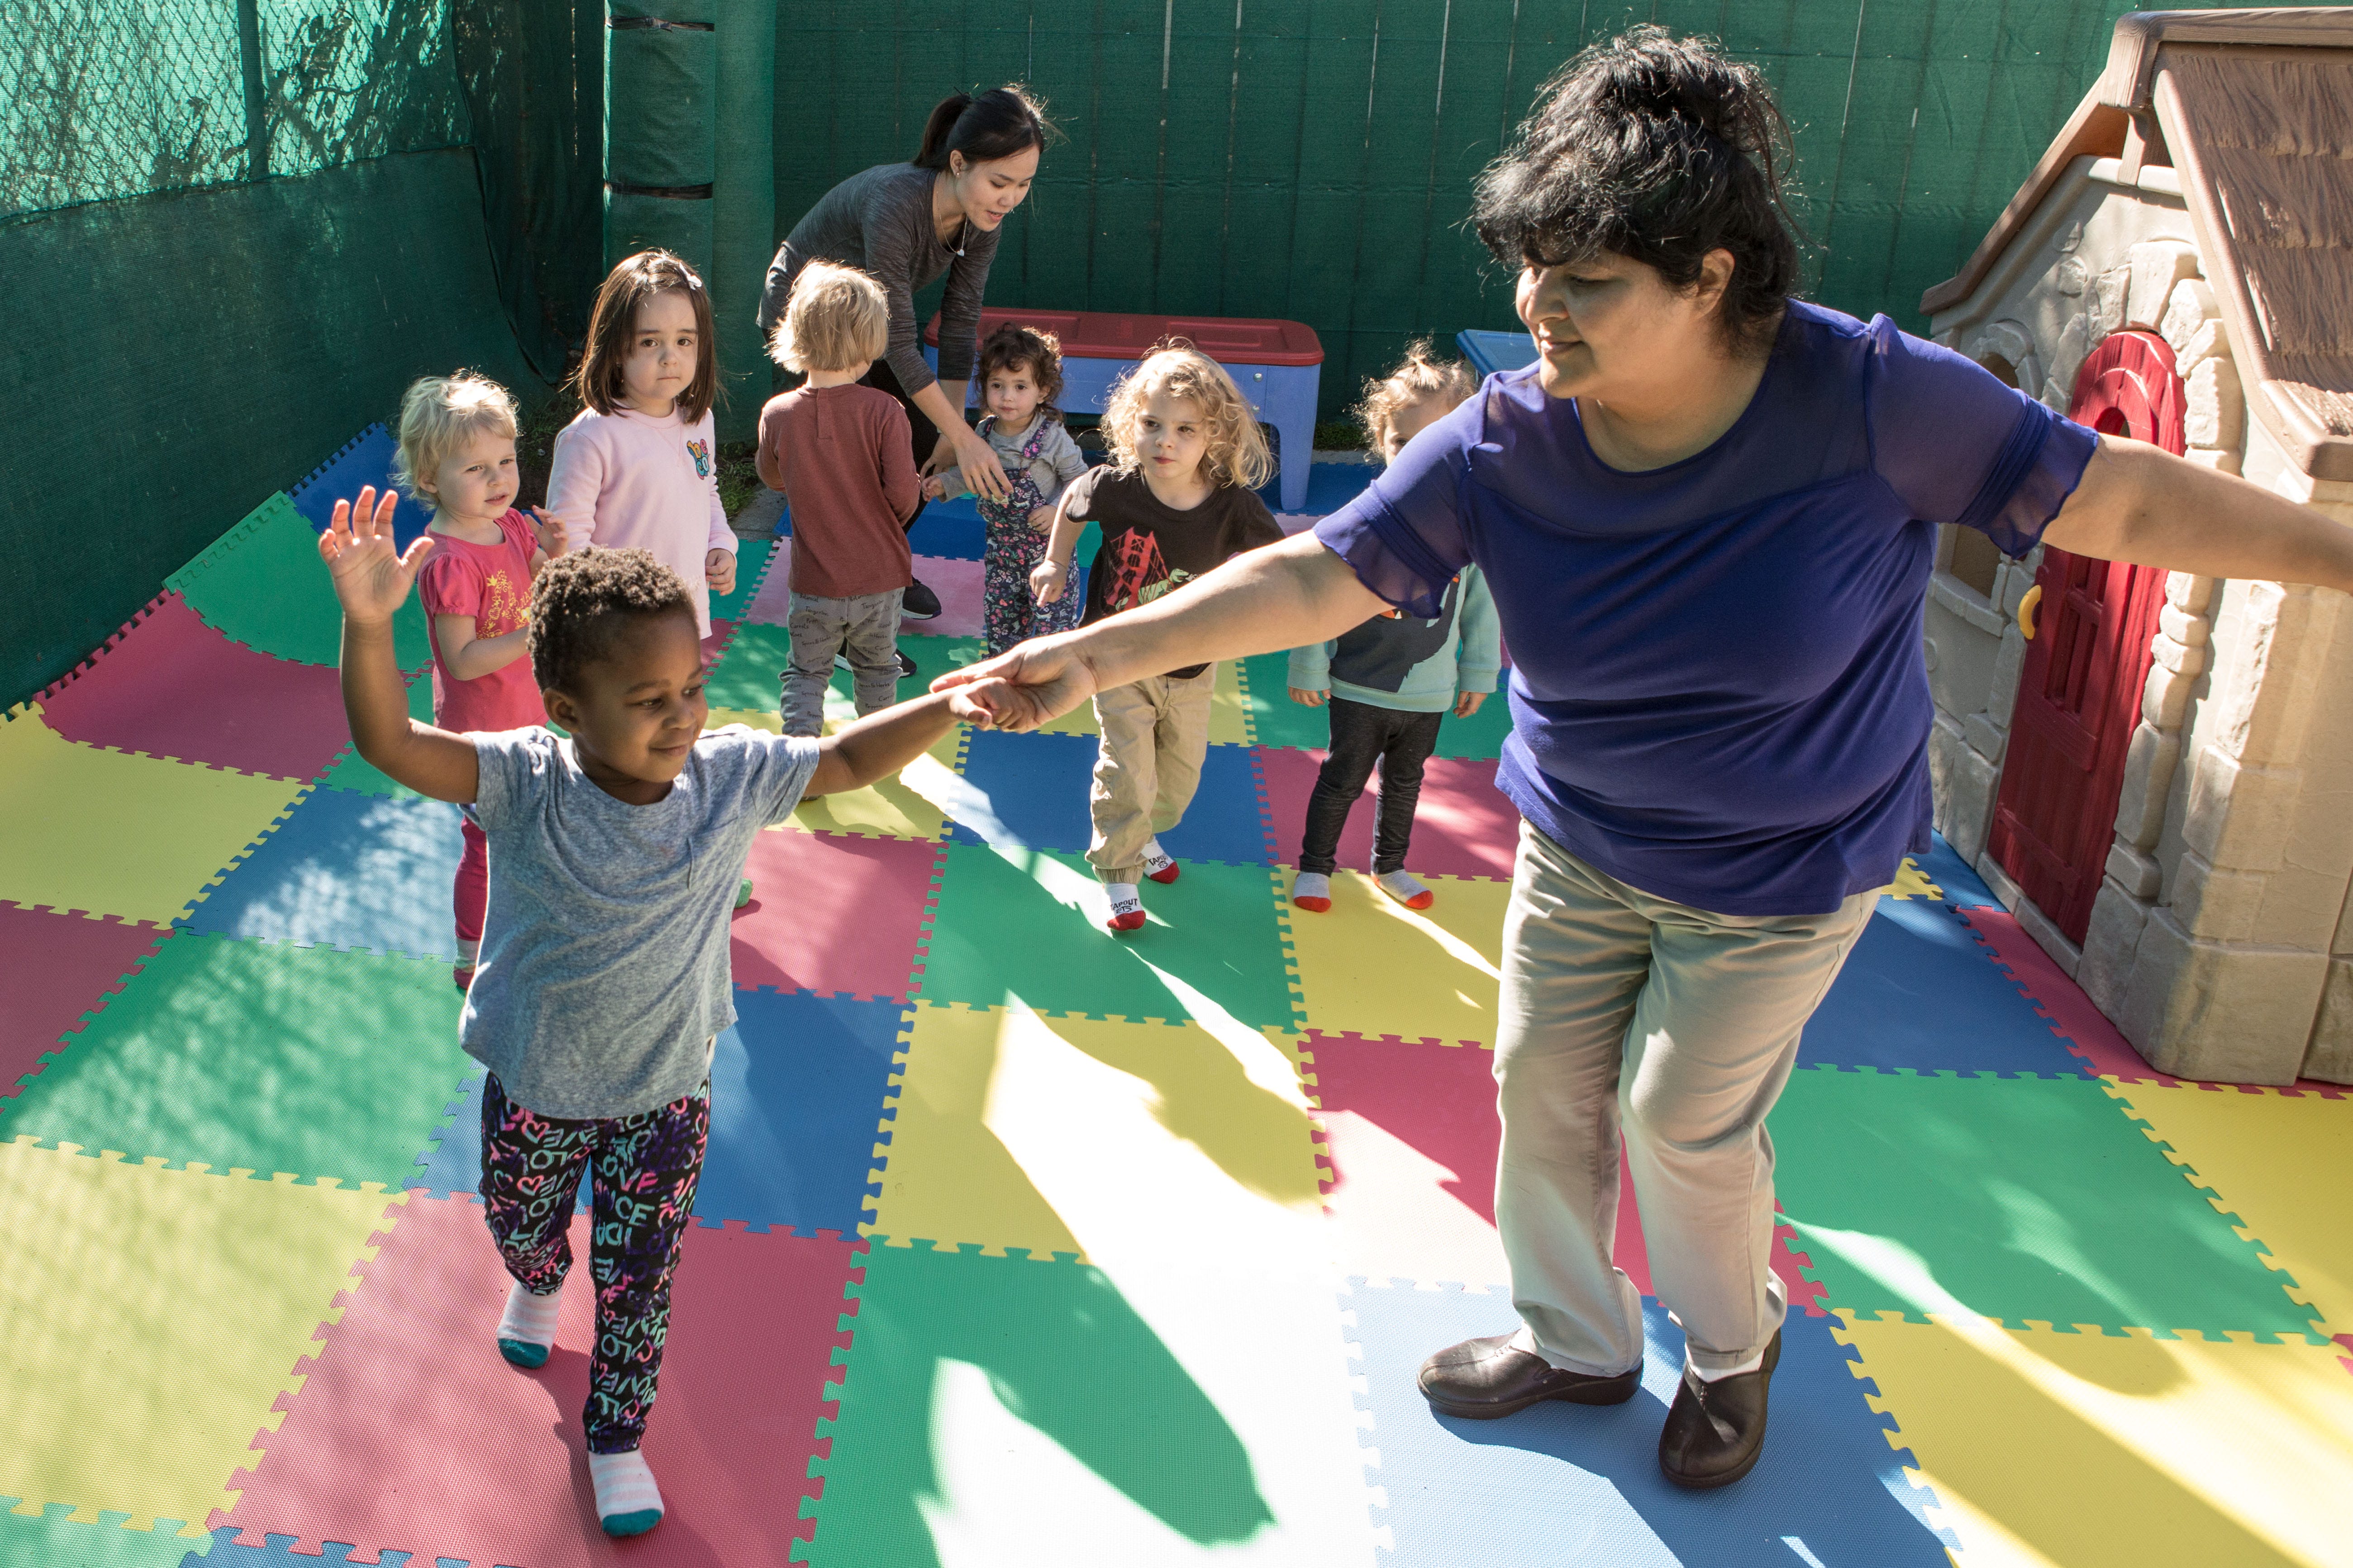 Zonia Torres, child care provider and educator at Shining Stars Family Child Care in San Francisco, dances with preschoolers Oct. 24.